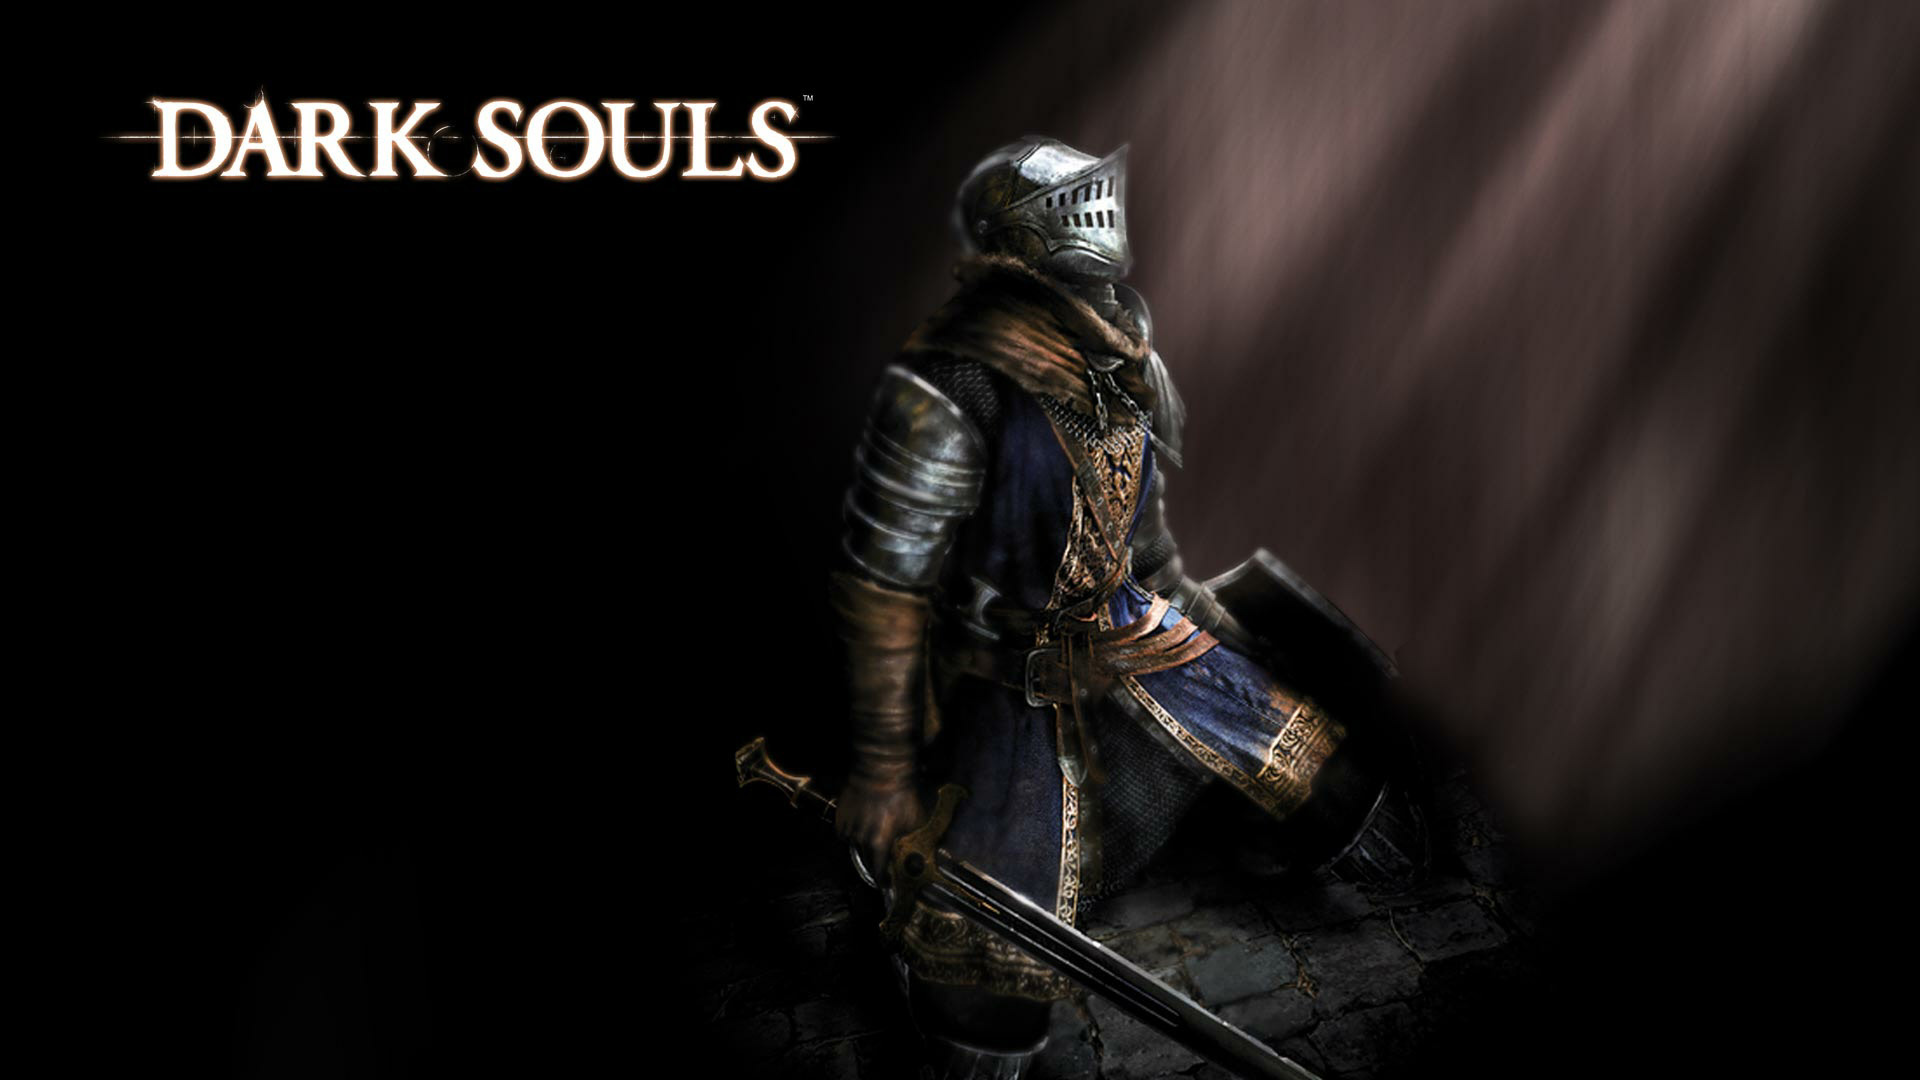 Dark Souls Wallpapers in HD Page 2 1920x1080